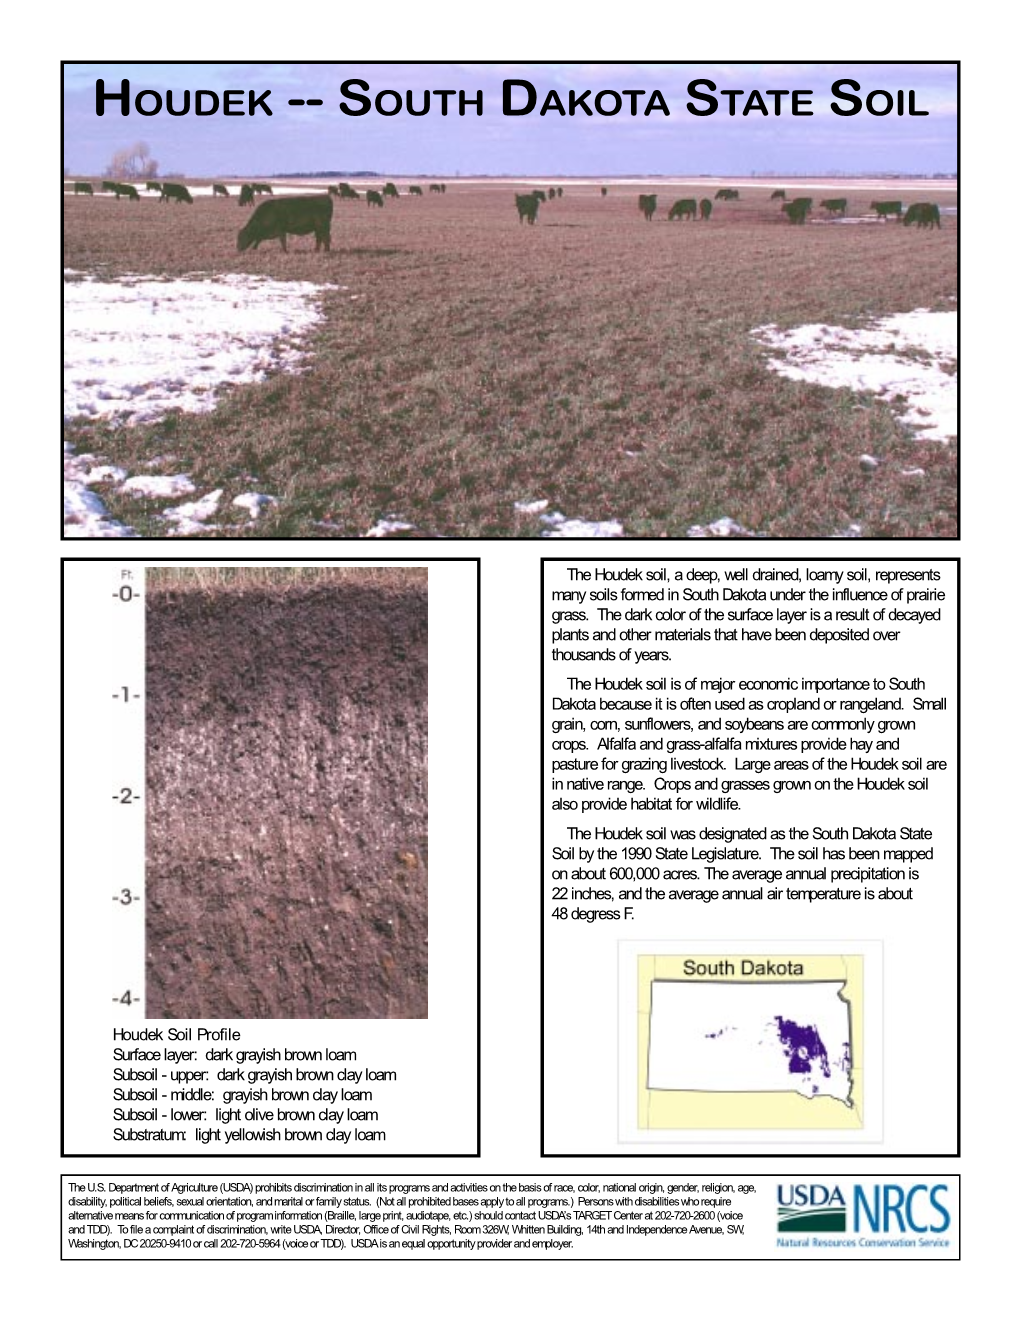 Houdek Soil, a Deep, Well Drained, Loamy Soil, Represents Many Soils Formed in South Dakota Under the Influence of Prairie Grass